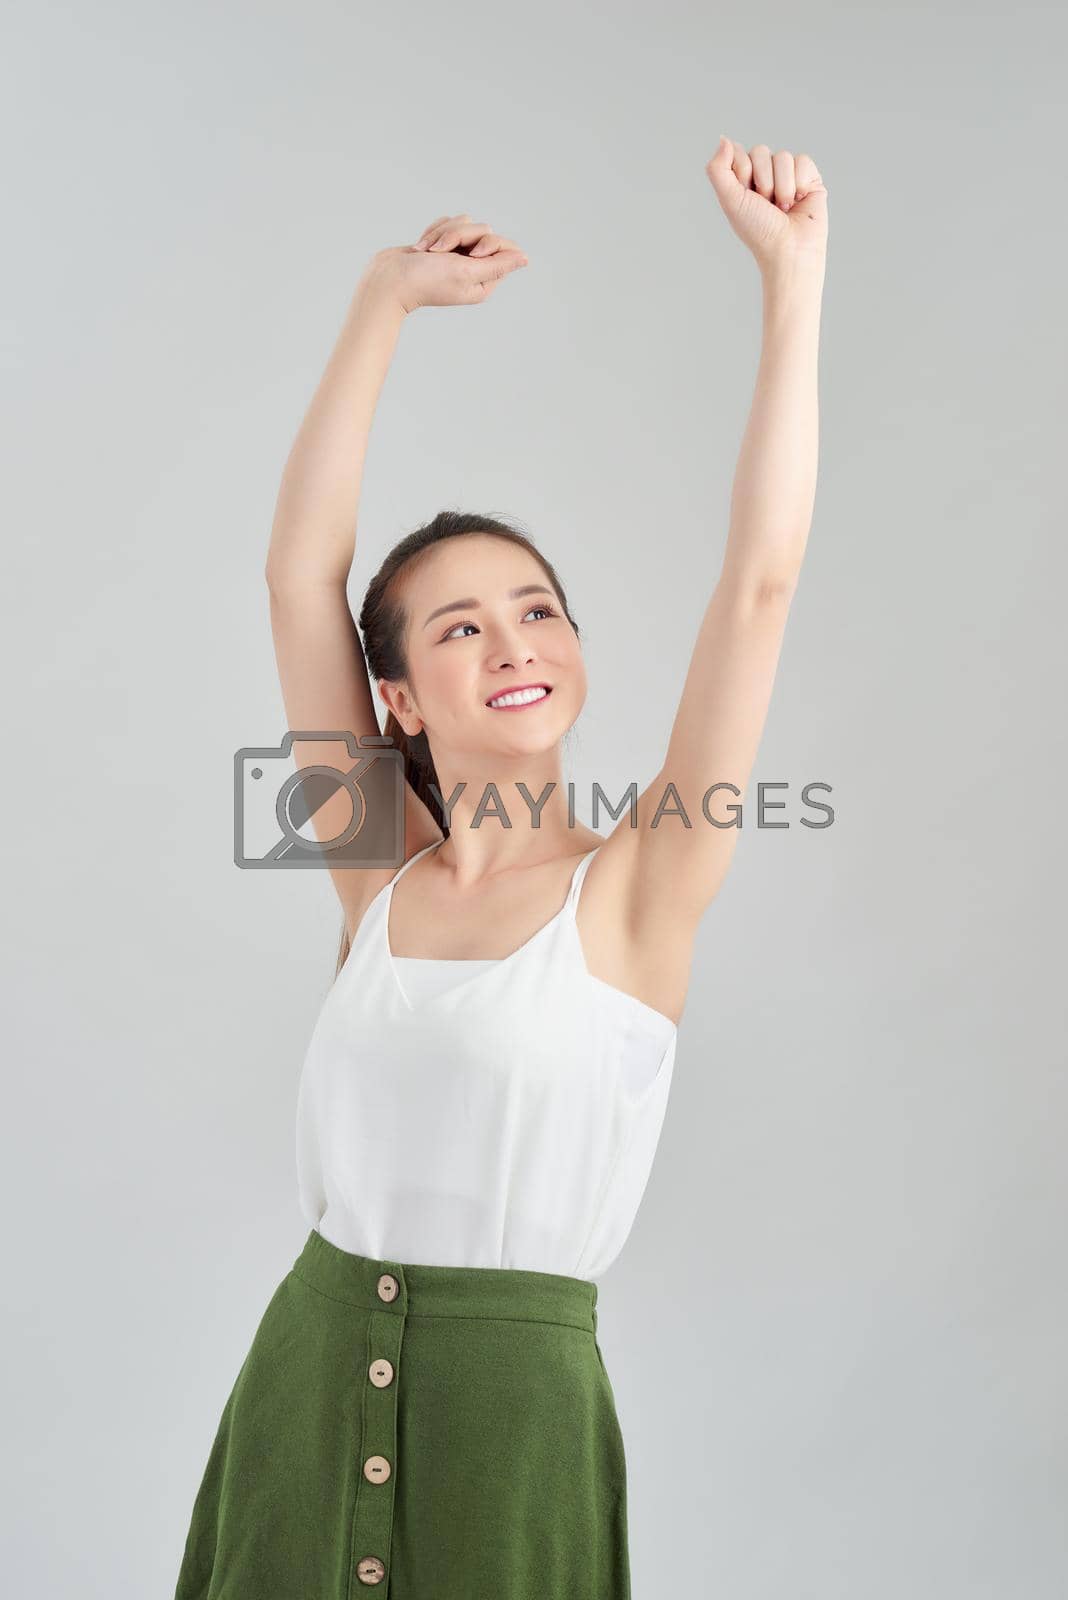 Royalty free image of Attractive young Asian woman relaxing and dancing over white background. by makidotvn